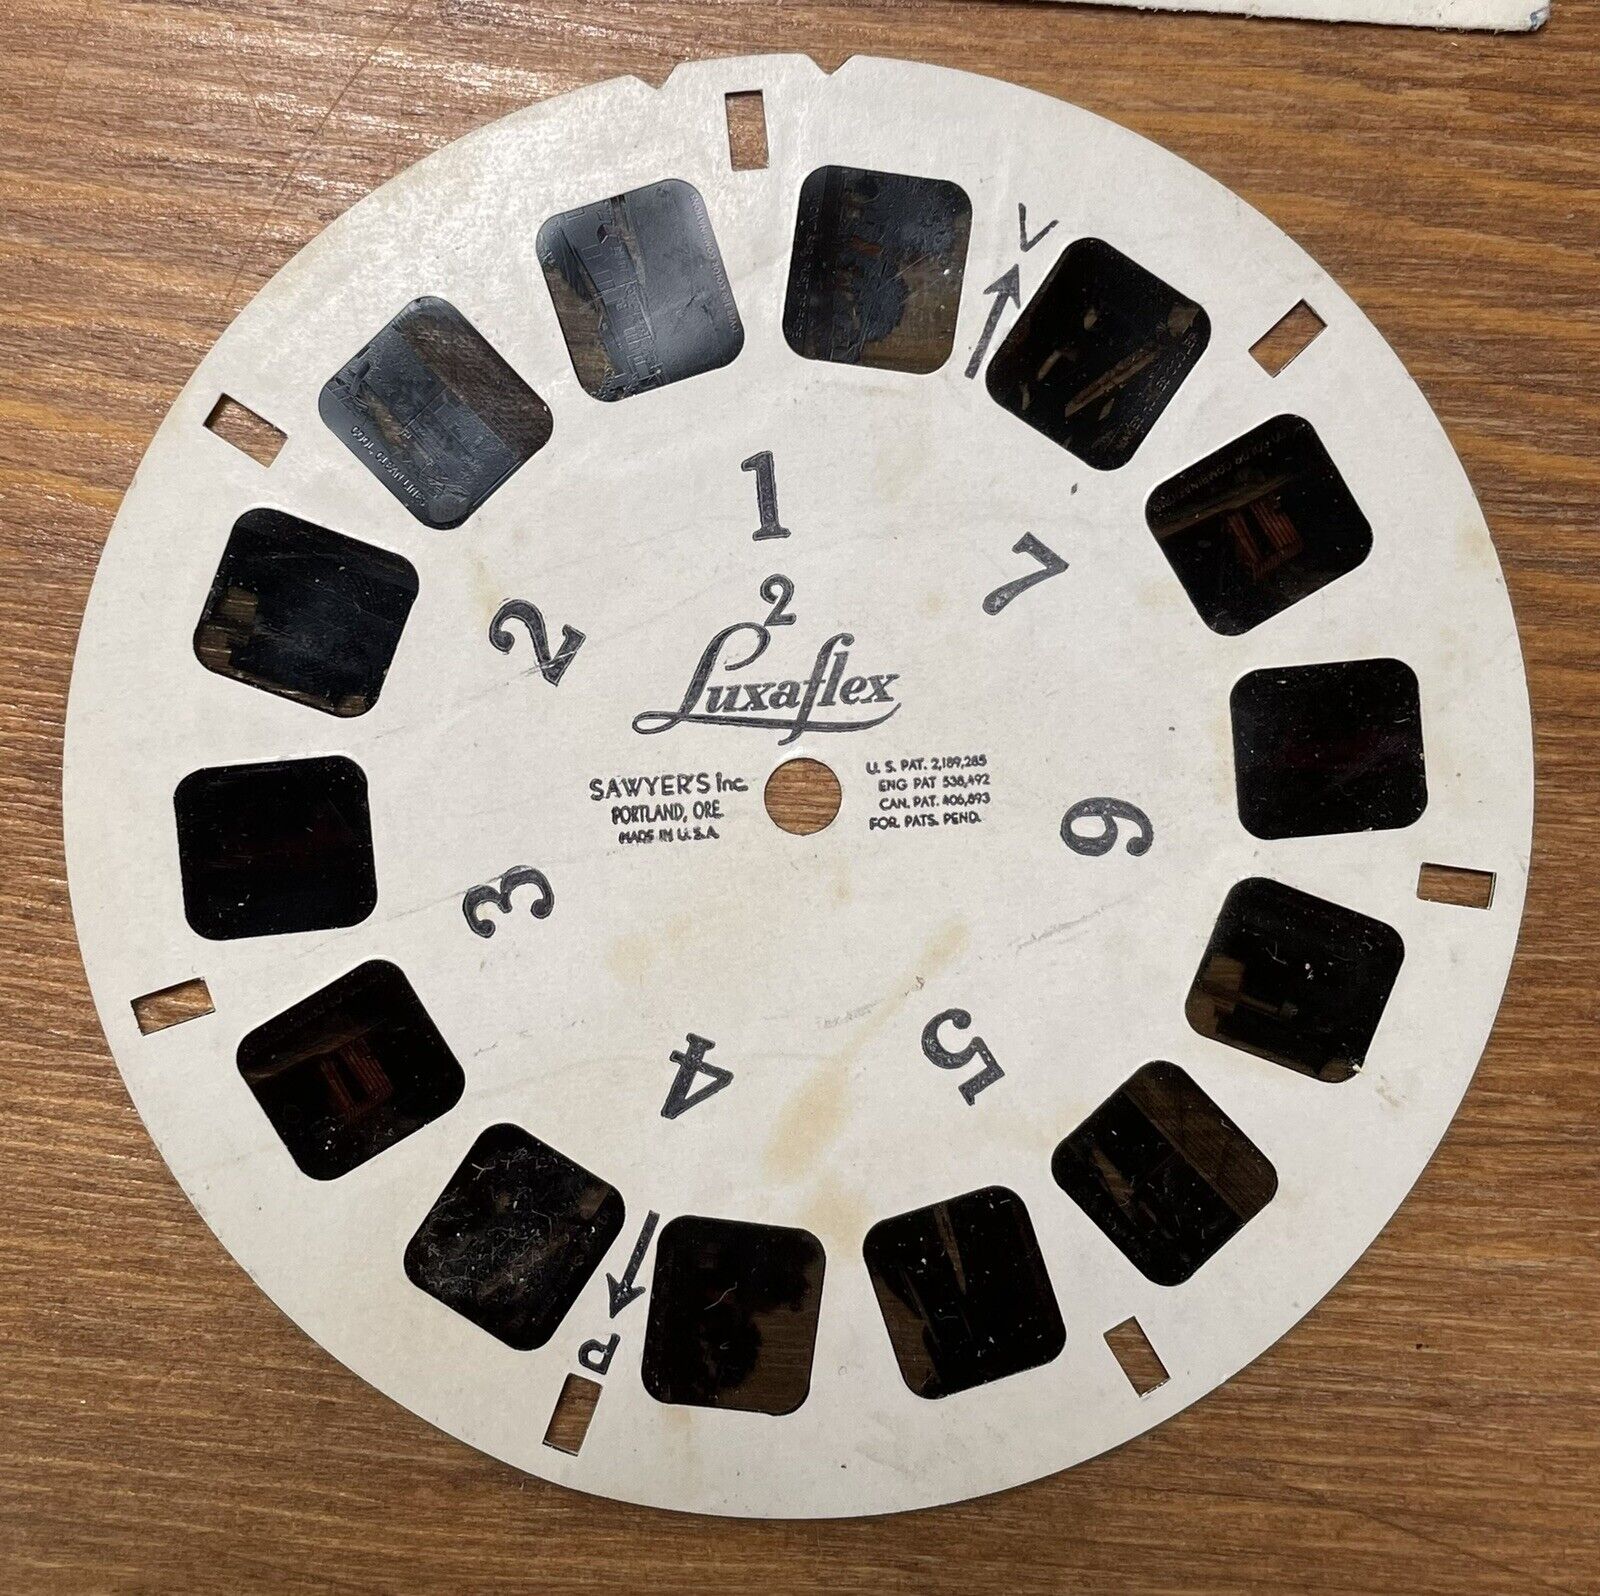 Vintage Luxaflex Colorpress Holland Commercial Demo View-Master Reel Sawyer’s